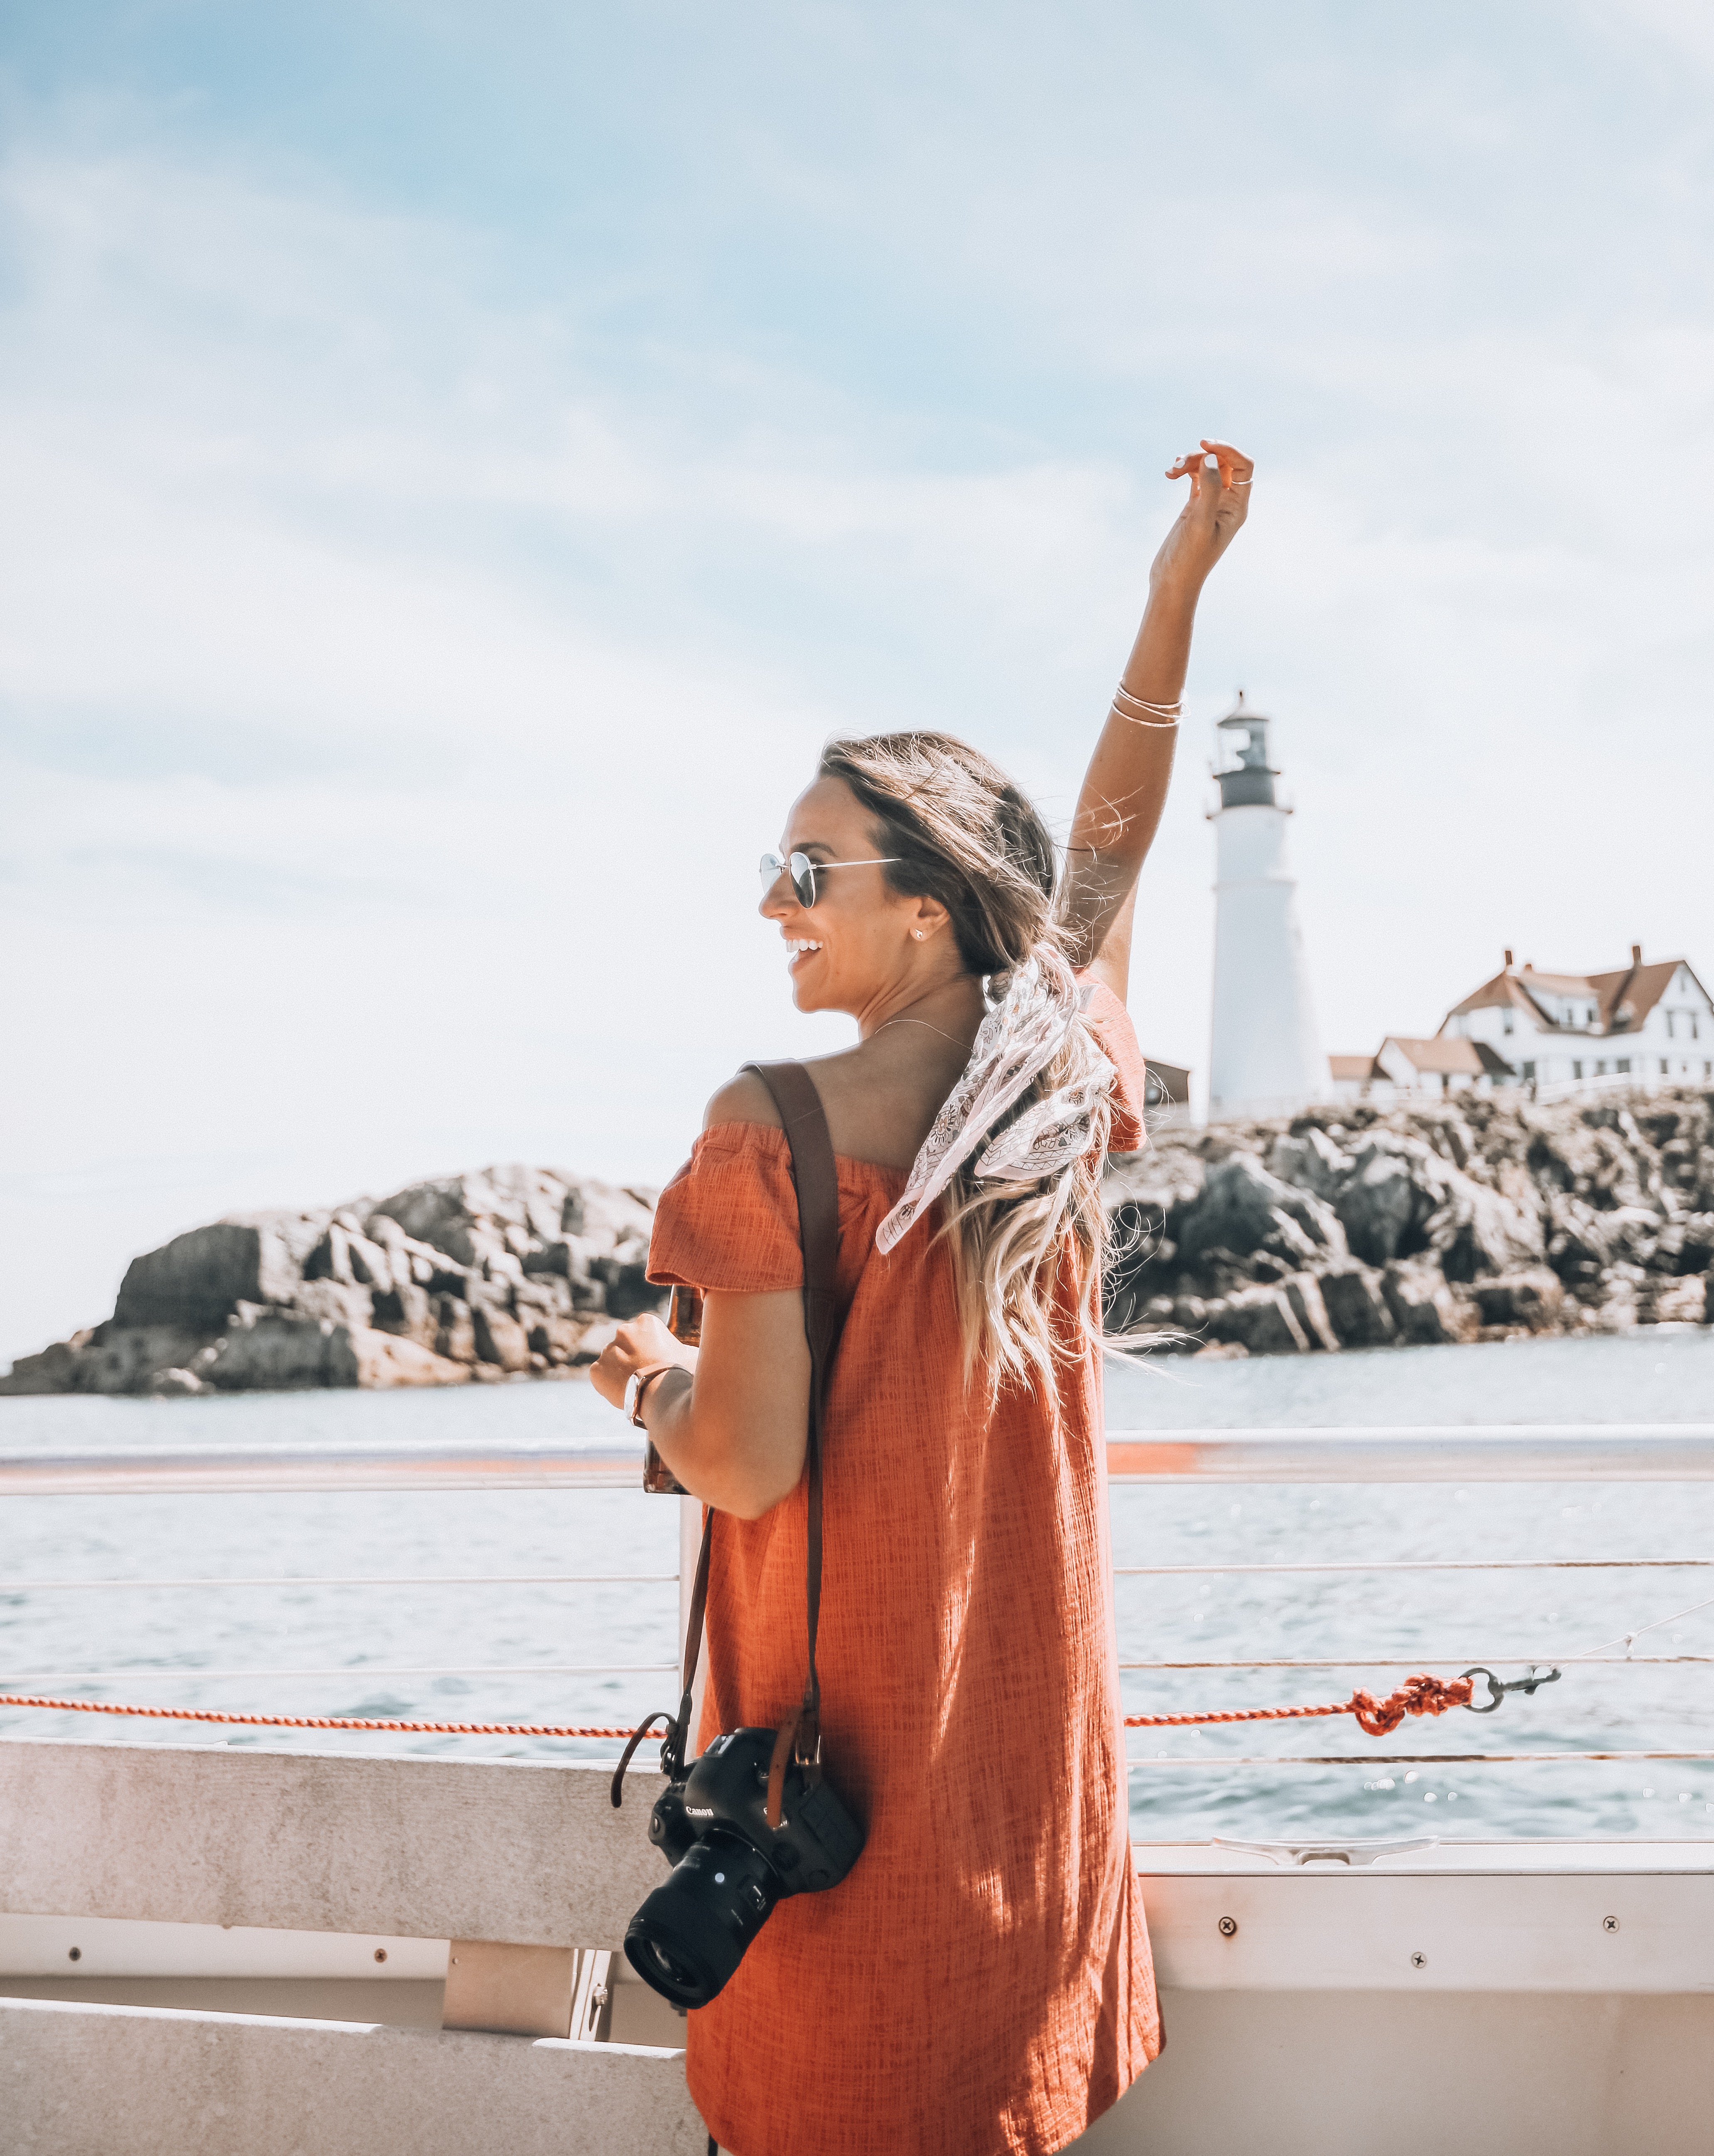 Things to do in Portland, Maine | Lobster Cruise with Lucky Catch | Maine Lobster Boat | Truly Experience Maine | Portland, Maine | Girl's Weekend in Maine via @elanaloo + elanaloo.com